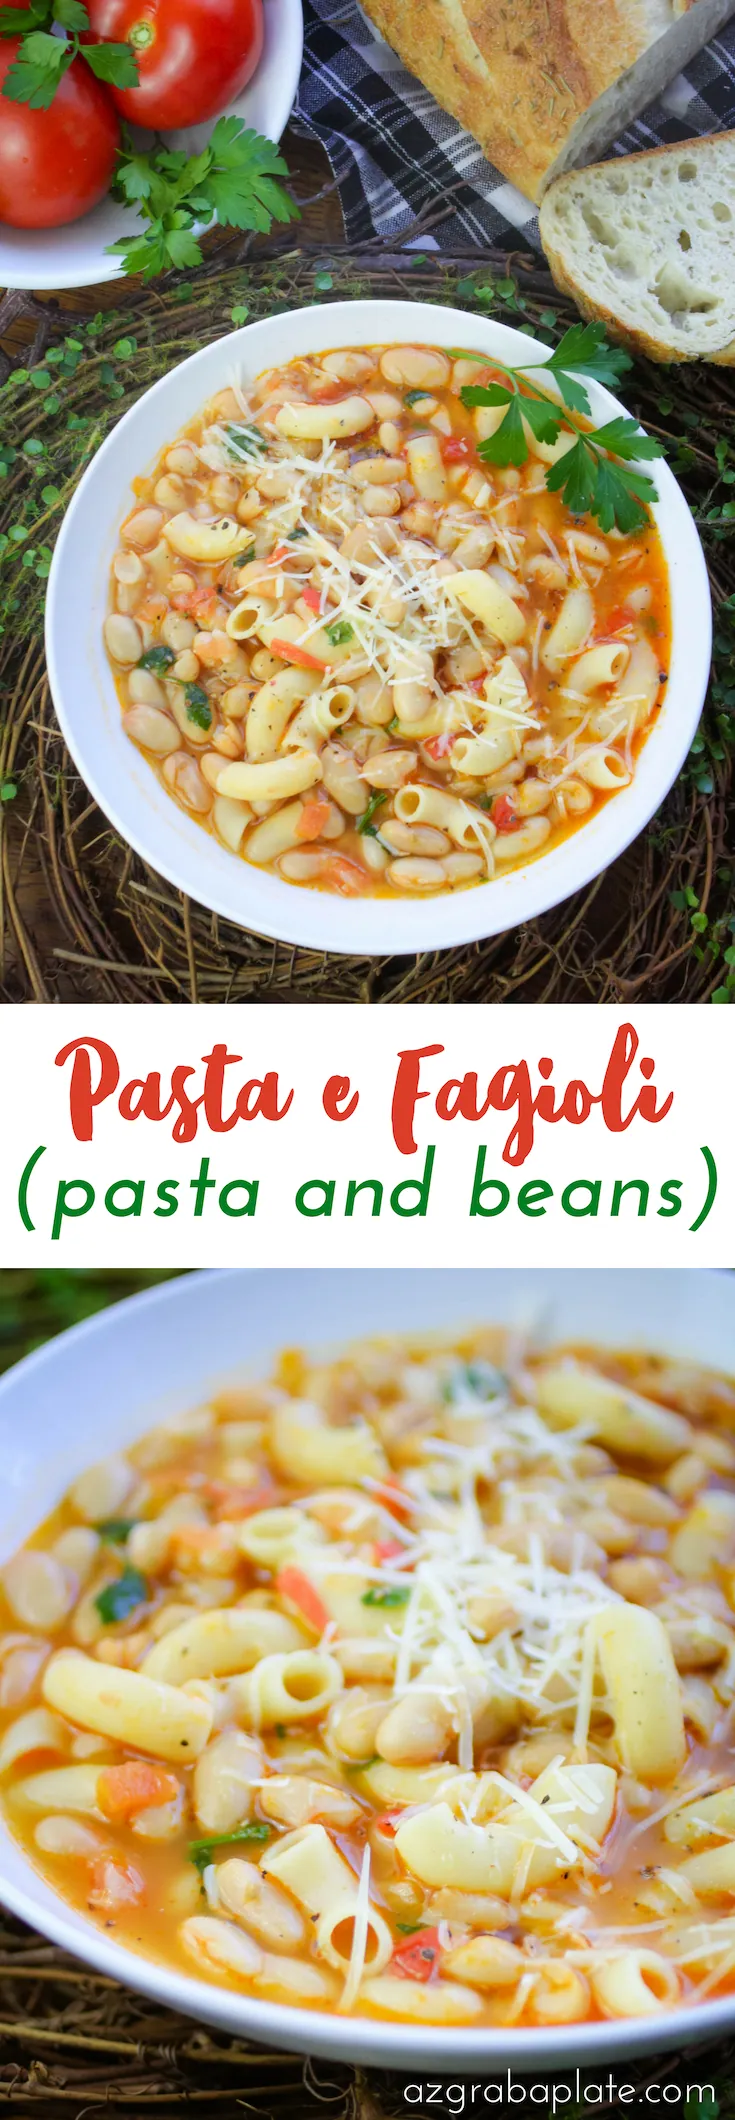 Pasta e Fagioli (Pasta and Beans) is an Italian dish that is easy to make, economical, and so delicious! Enjoy Pasta e Fagioli (Pasta and Beans) any night of the week!